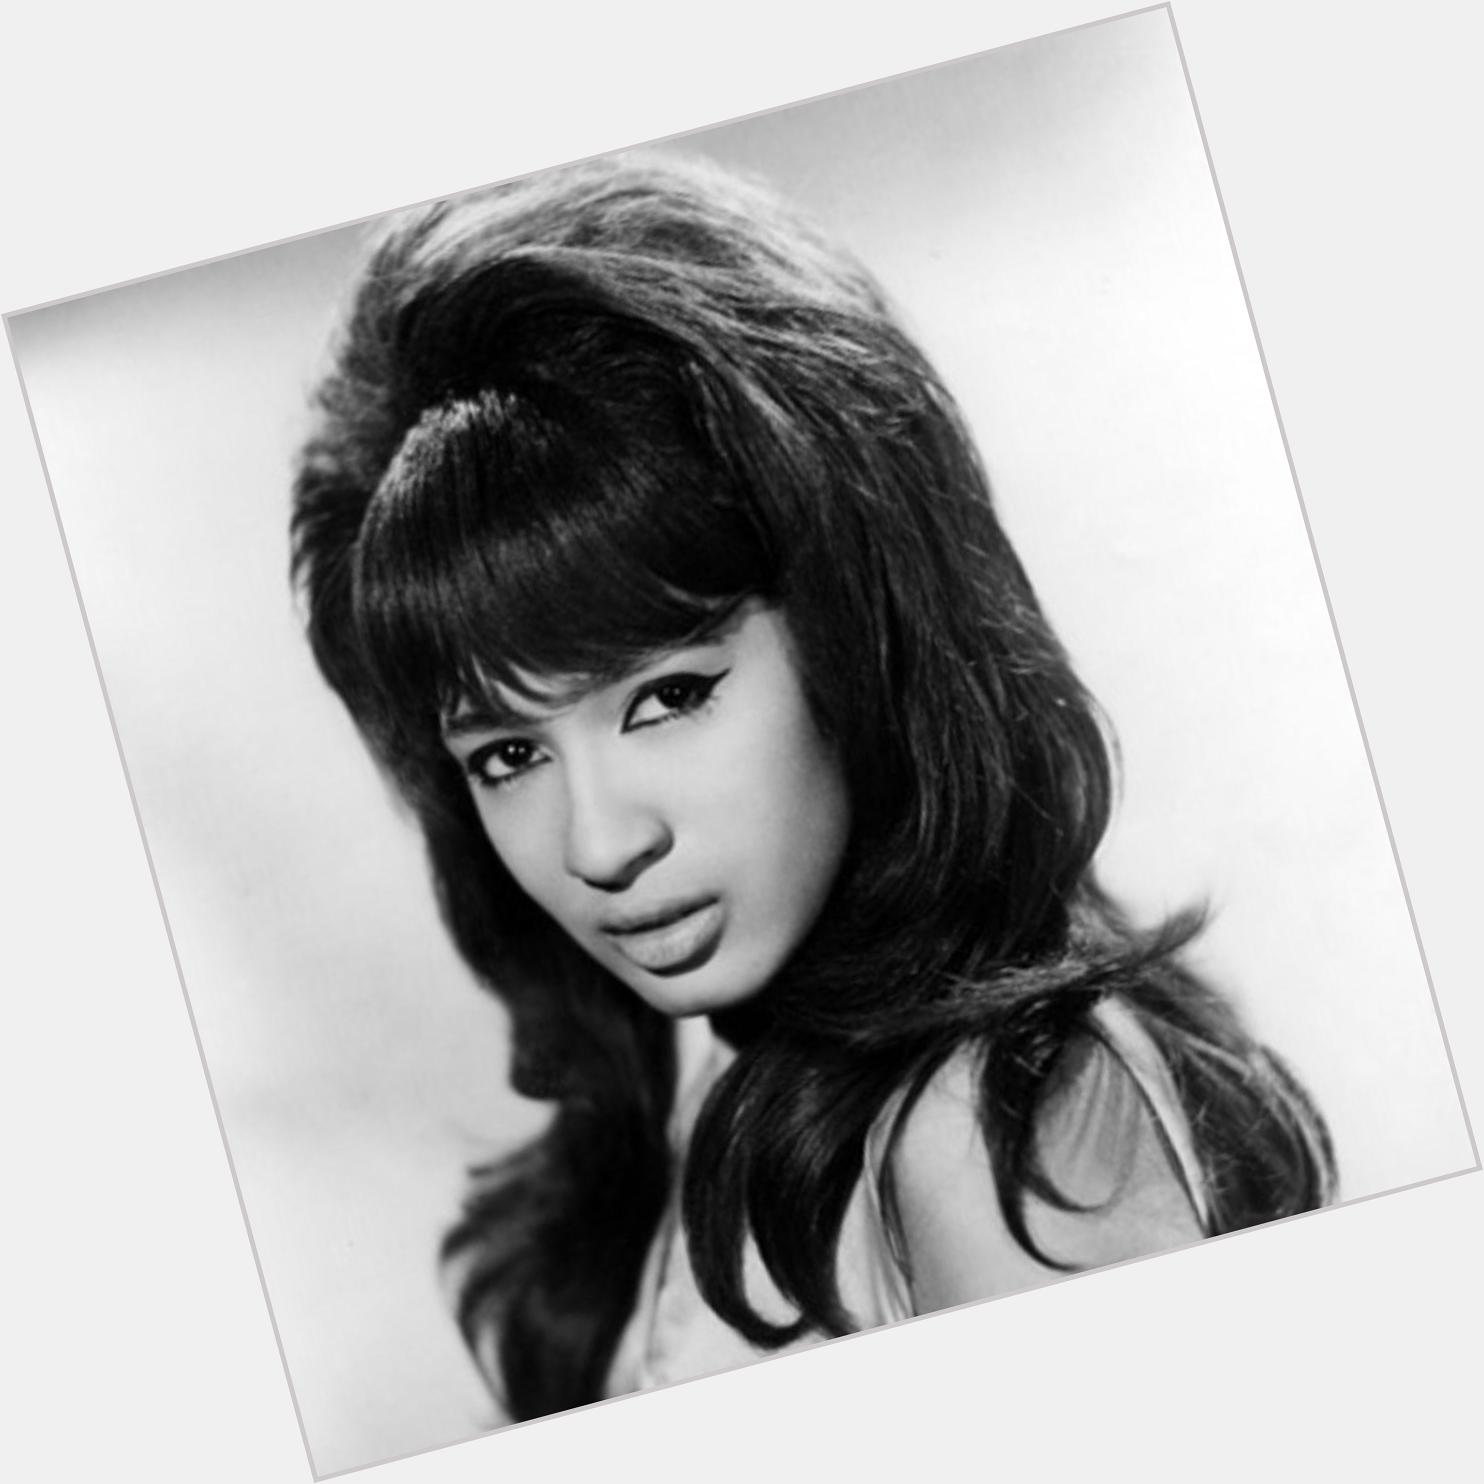 Happy Birthday to Ronnie Spector, who turns 72 today! 